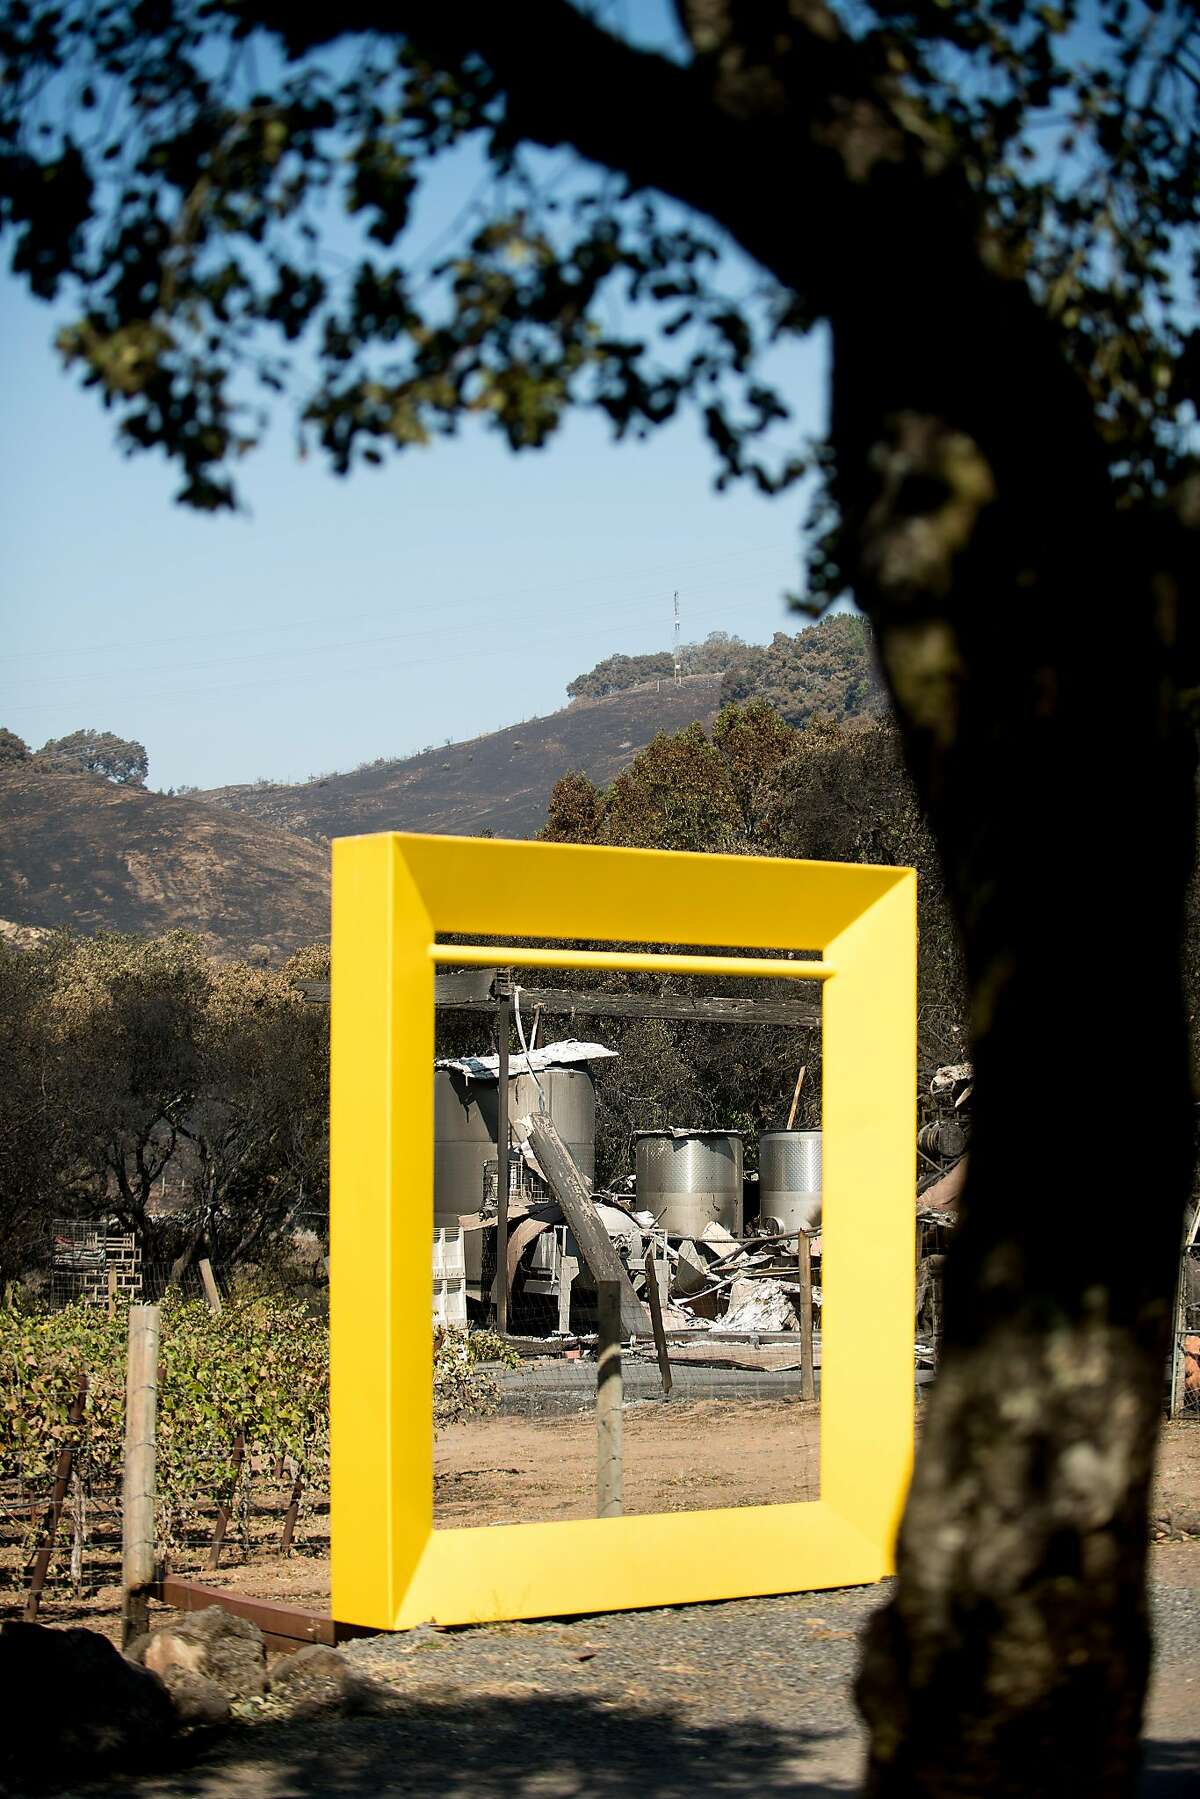 Wine tanks burned by the Tubbs fire stand behind Robert Ellison's sculpture 